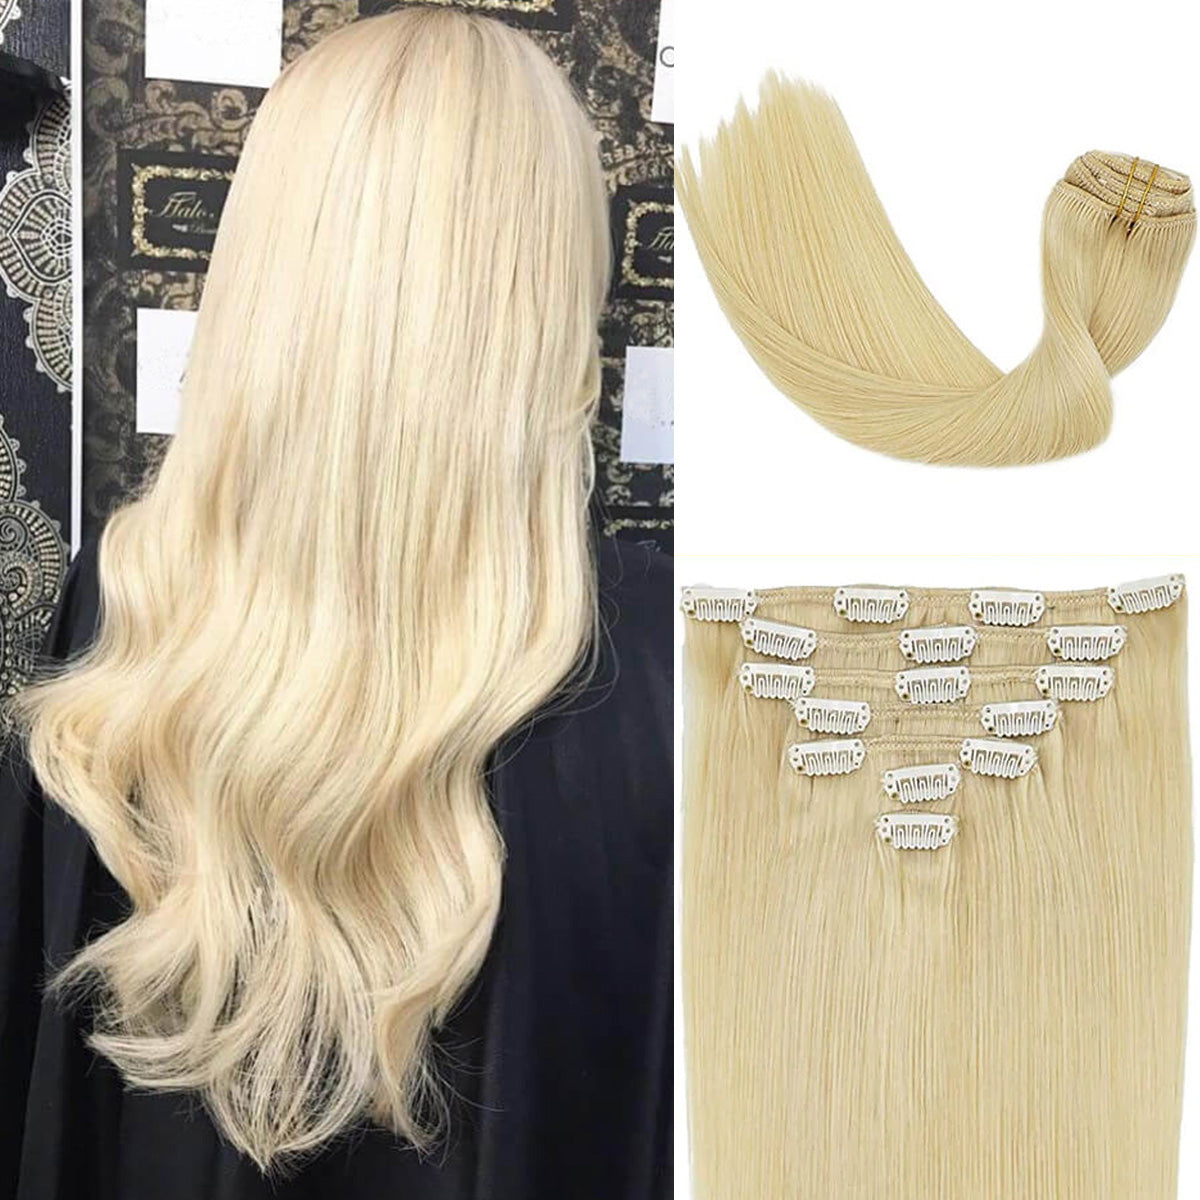 Bleached Blonde Clip In Hair Extensions 120g set